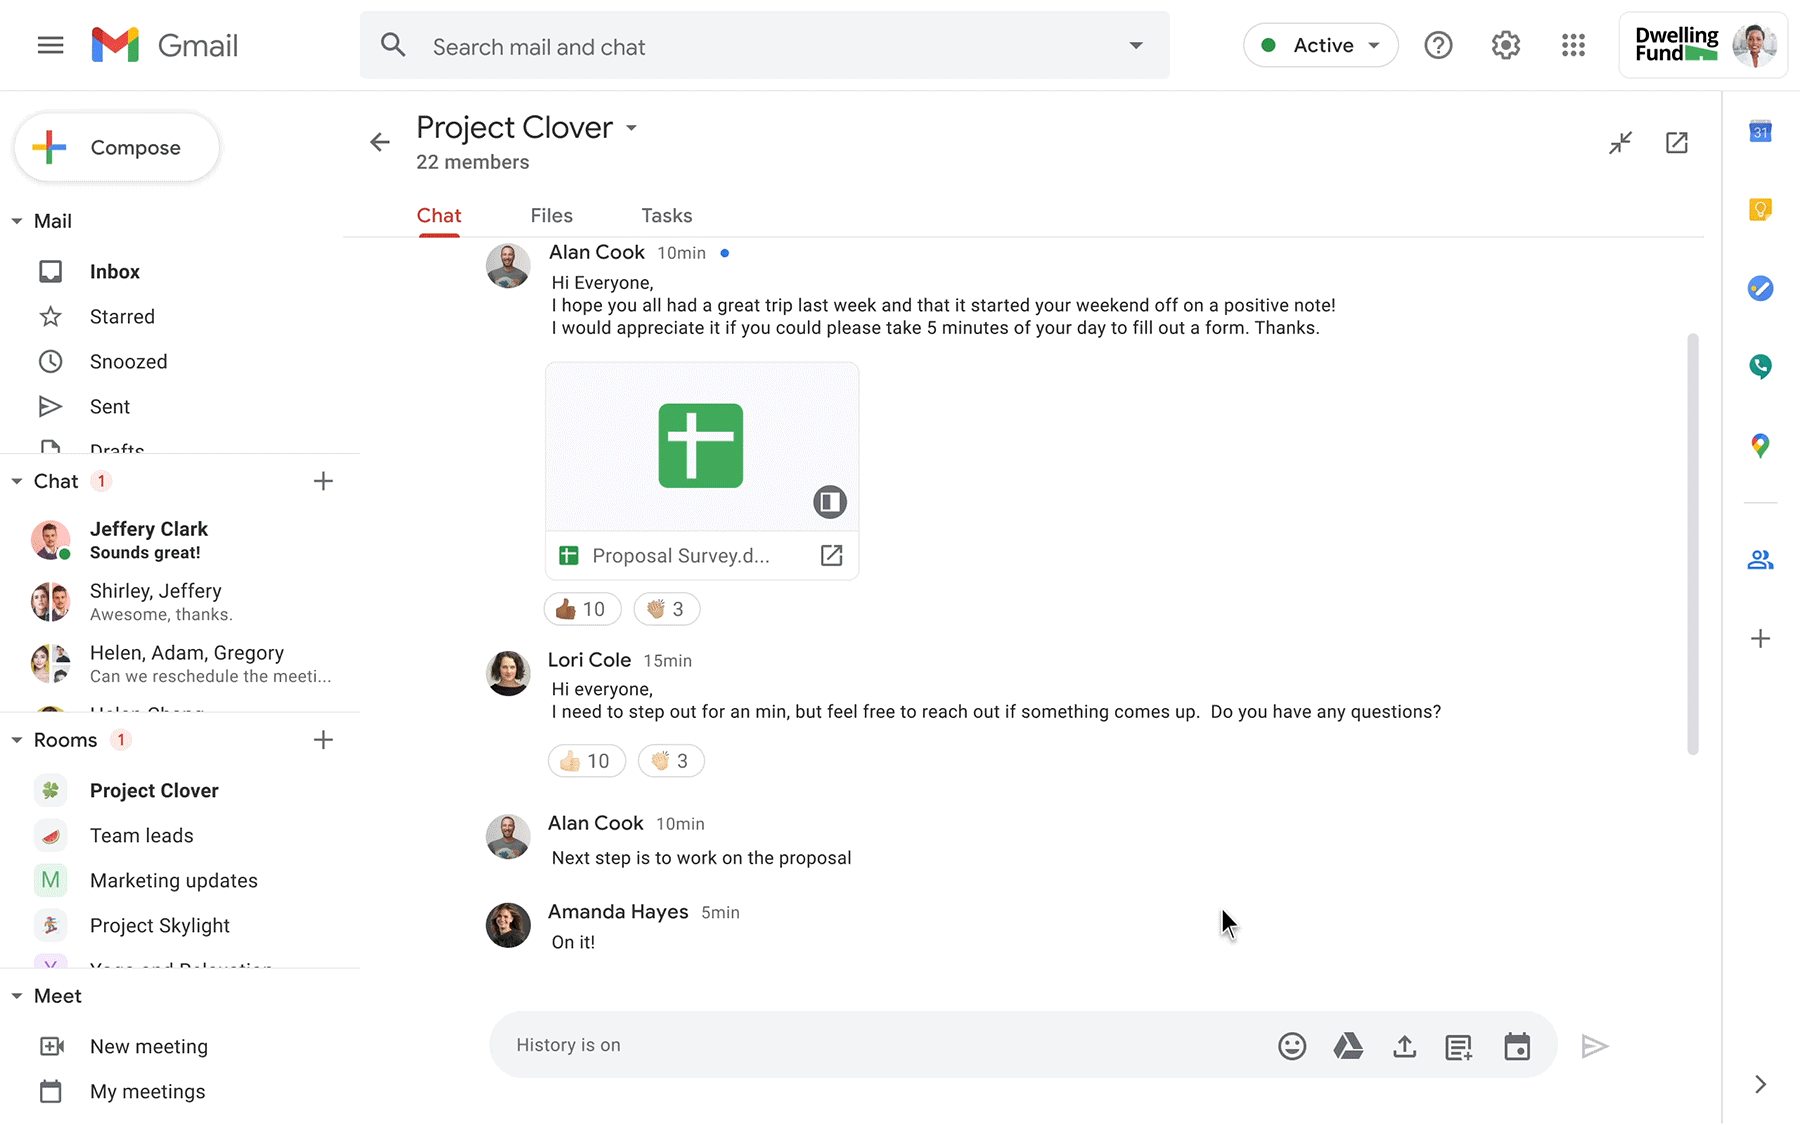 dynamically create and collaborate on a document with guests in a Chat room